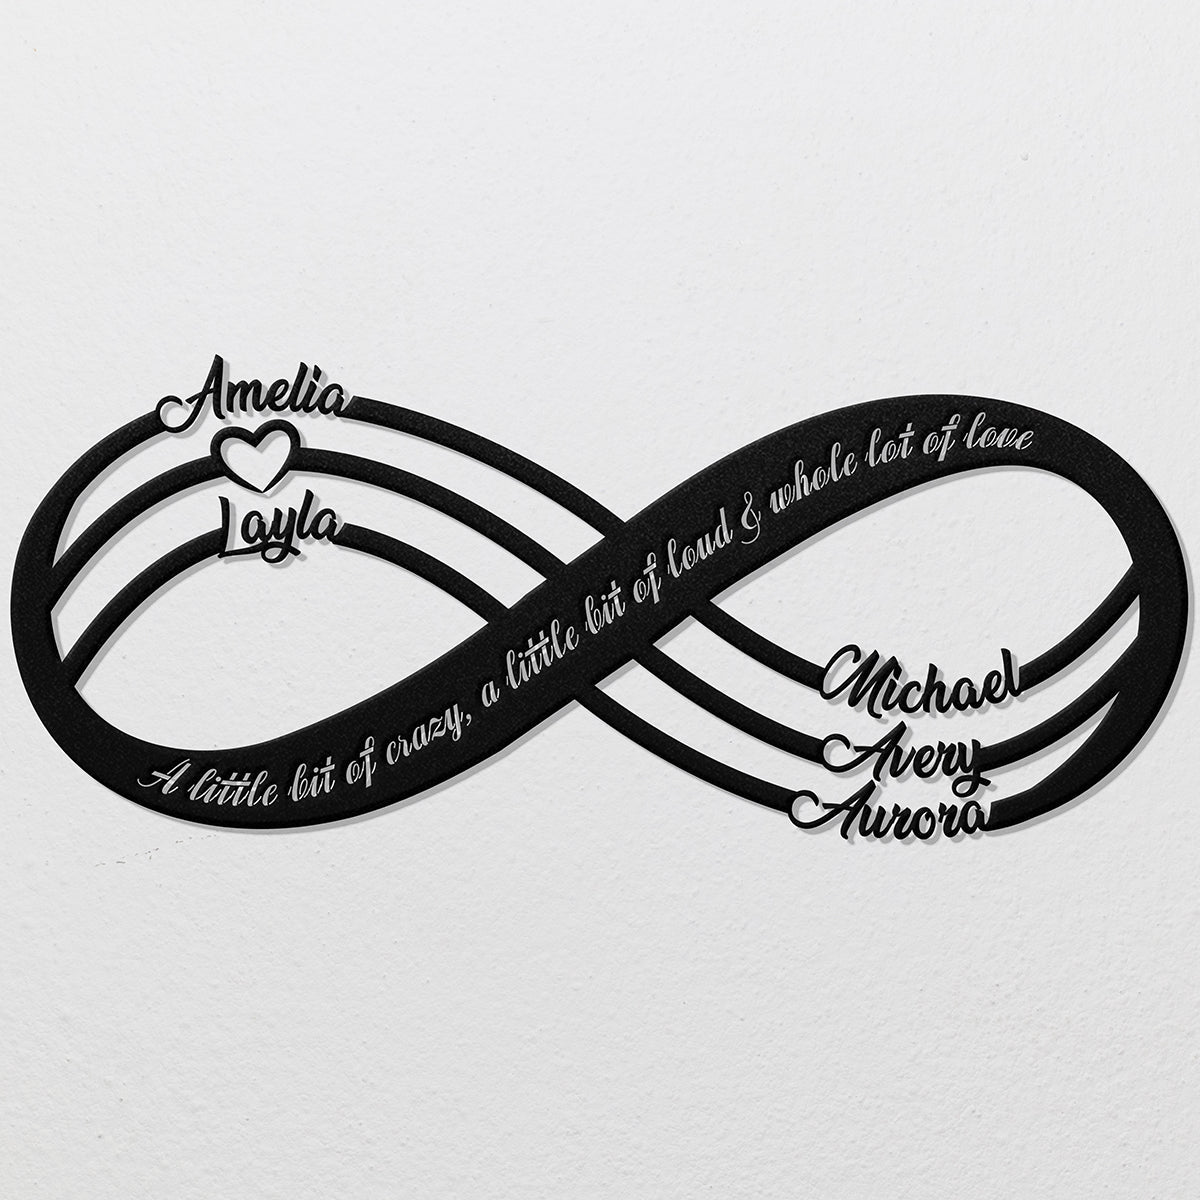 Family Infinity Symbol - A Little Bit of Crazy, A Little Bit of Loud & Whole Lot of Love